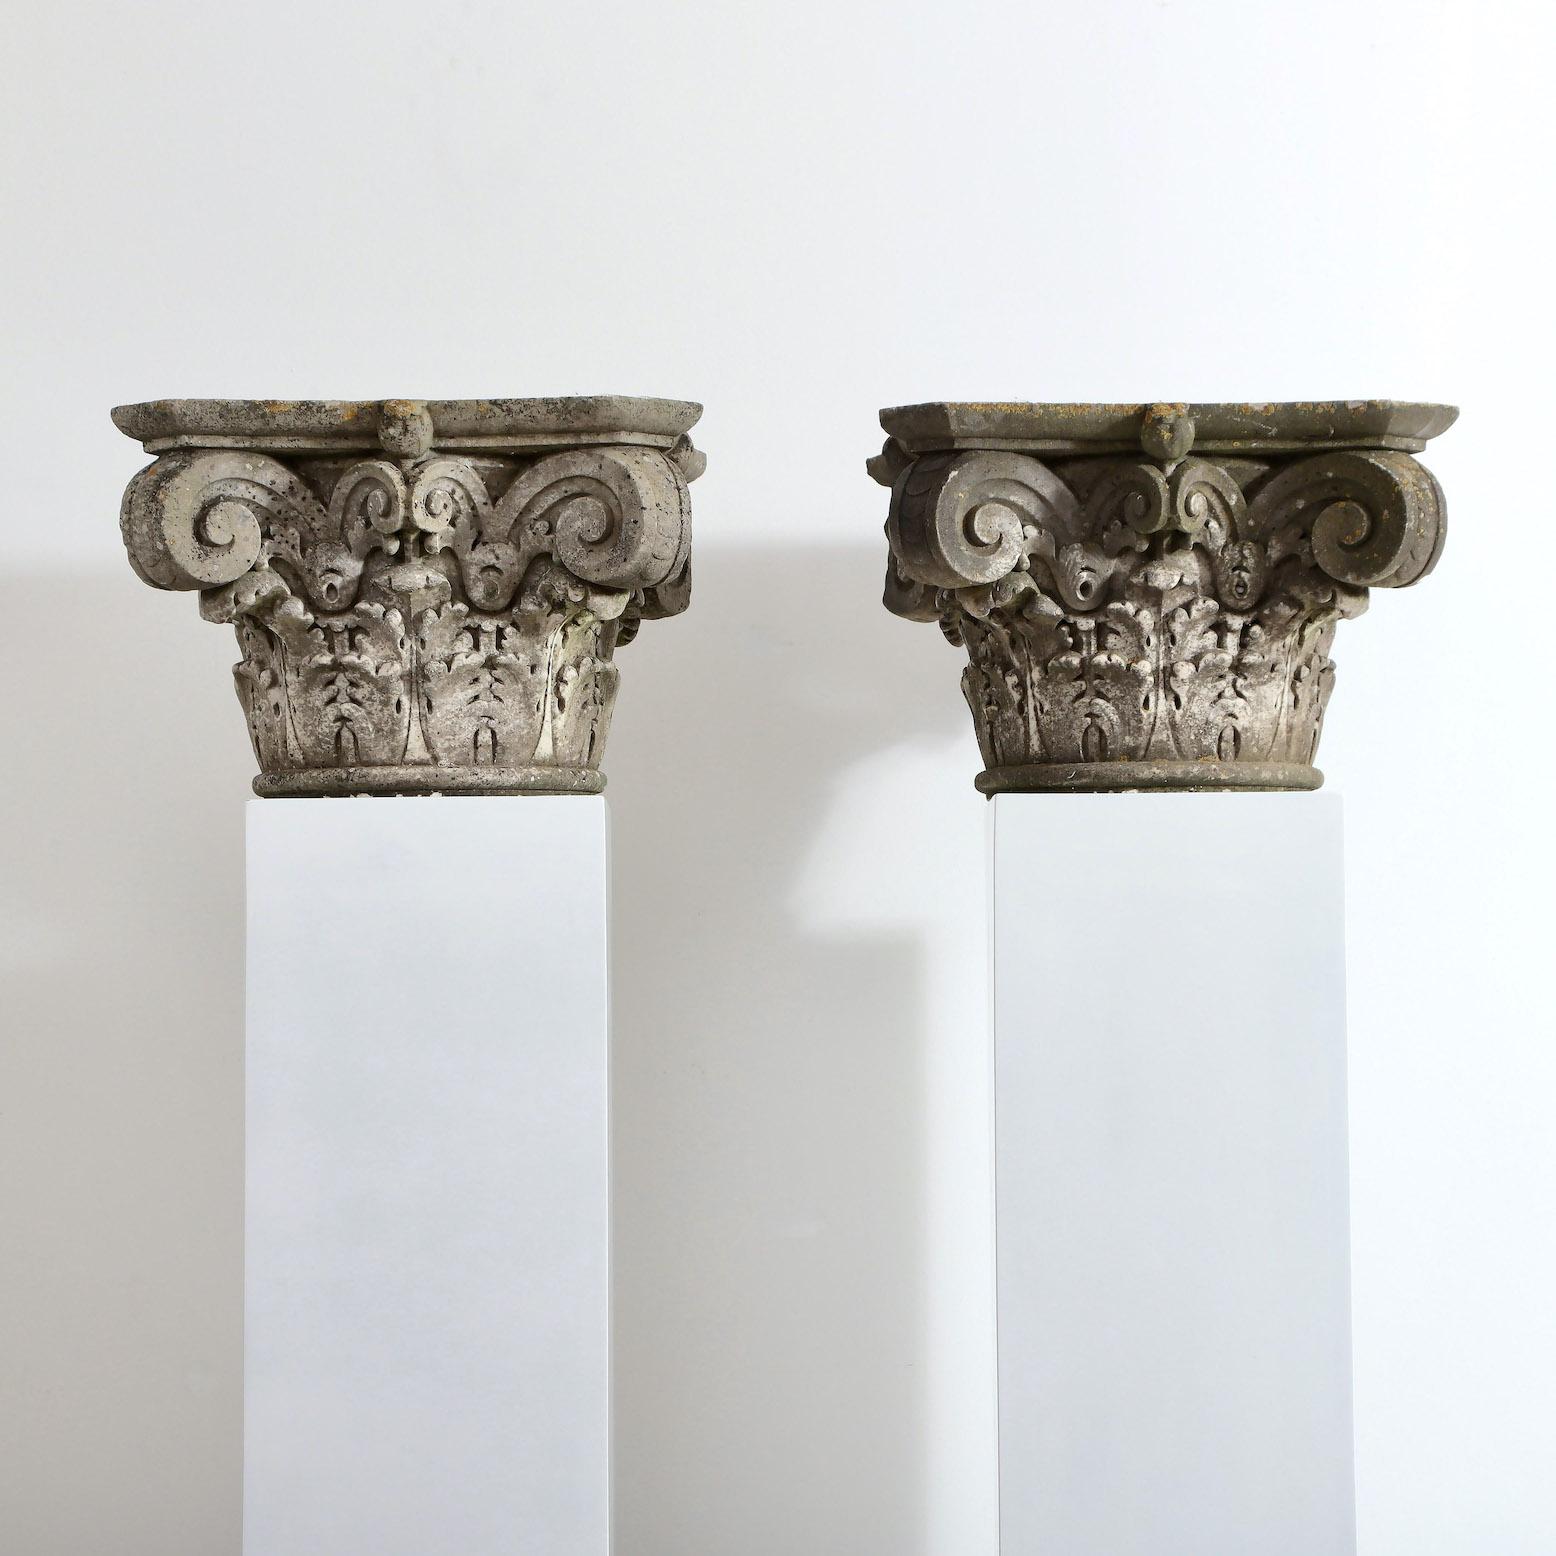 A pair of 19th century carved marble corinthian capitals.

England, circa 1820

” An exceptionally well carved pair of marble corinthian capitals, unusually hollowed out in the middle so ideal for indoor or outdoor floral display, naturally